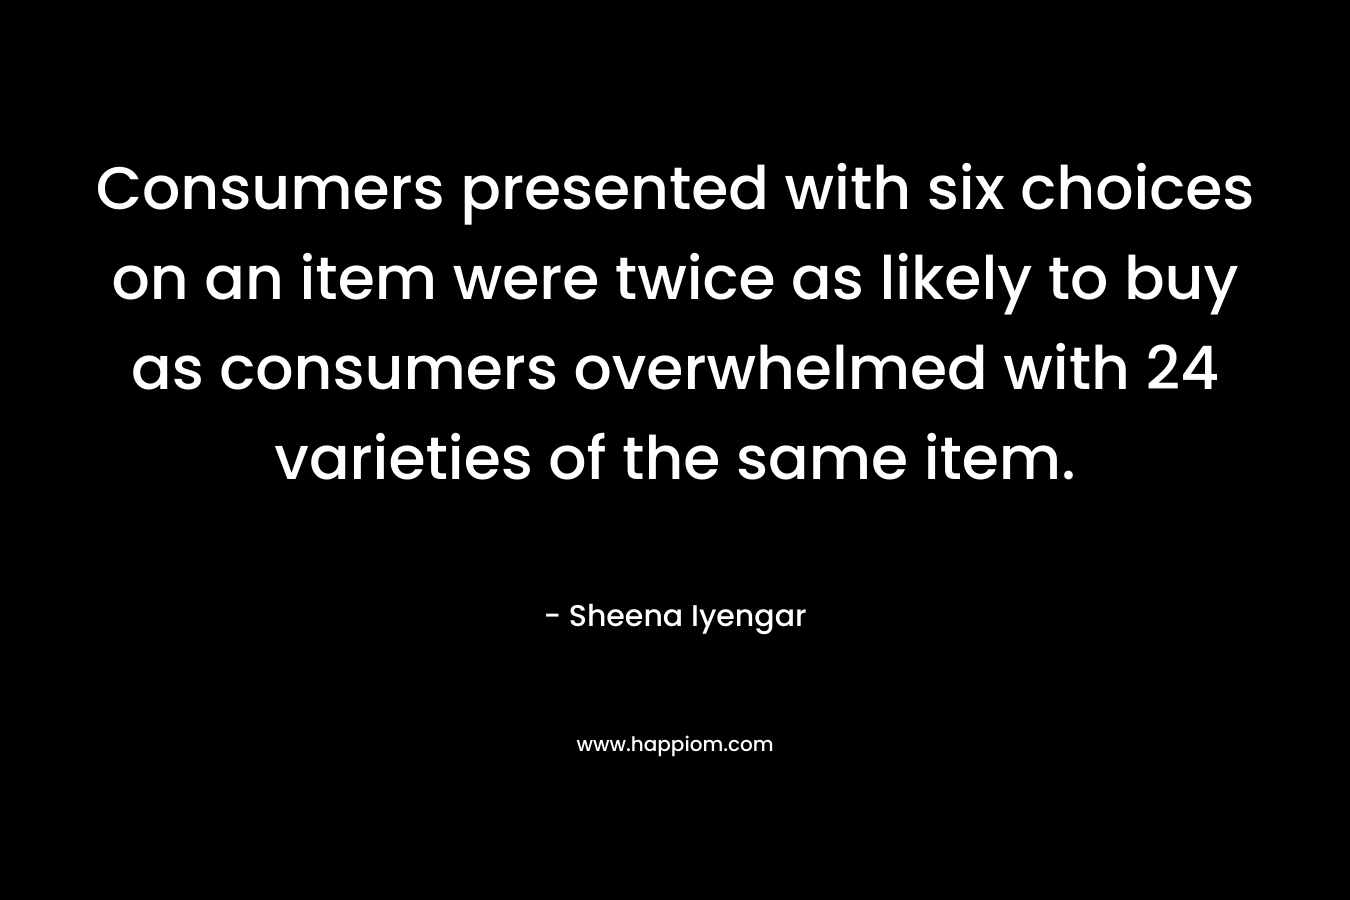 Consumers presented with six choices on an item were twice as likely to buy as consumers overwhelmed with 24 varieties of the same item. – Sheena Iyengar